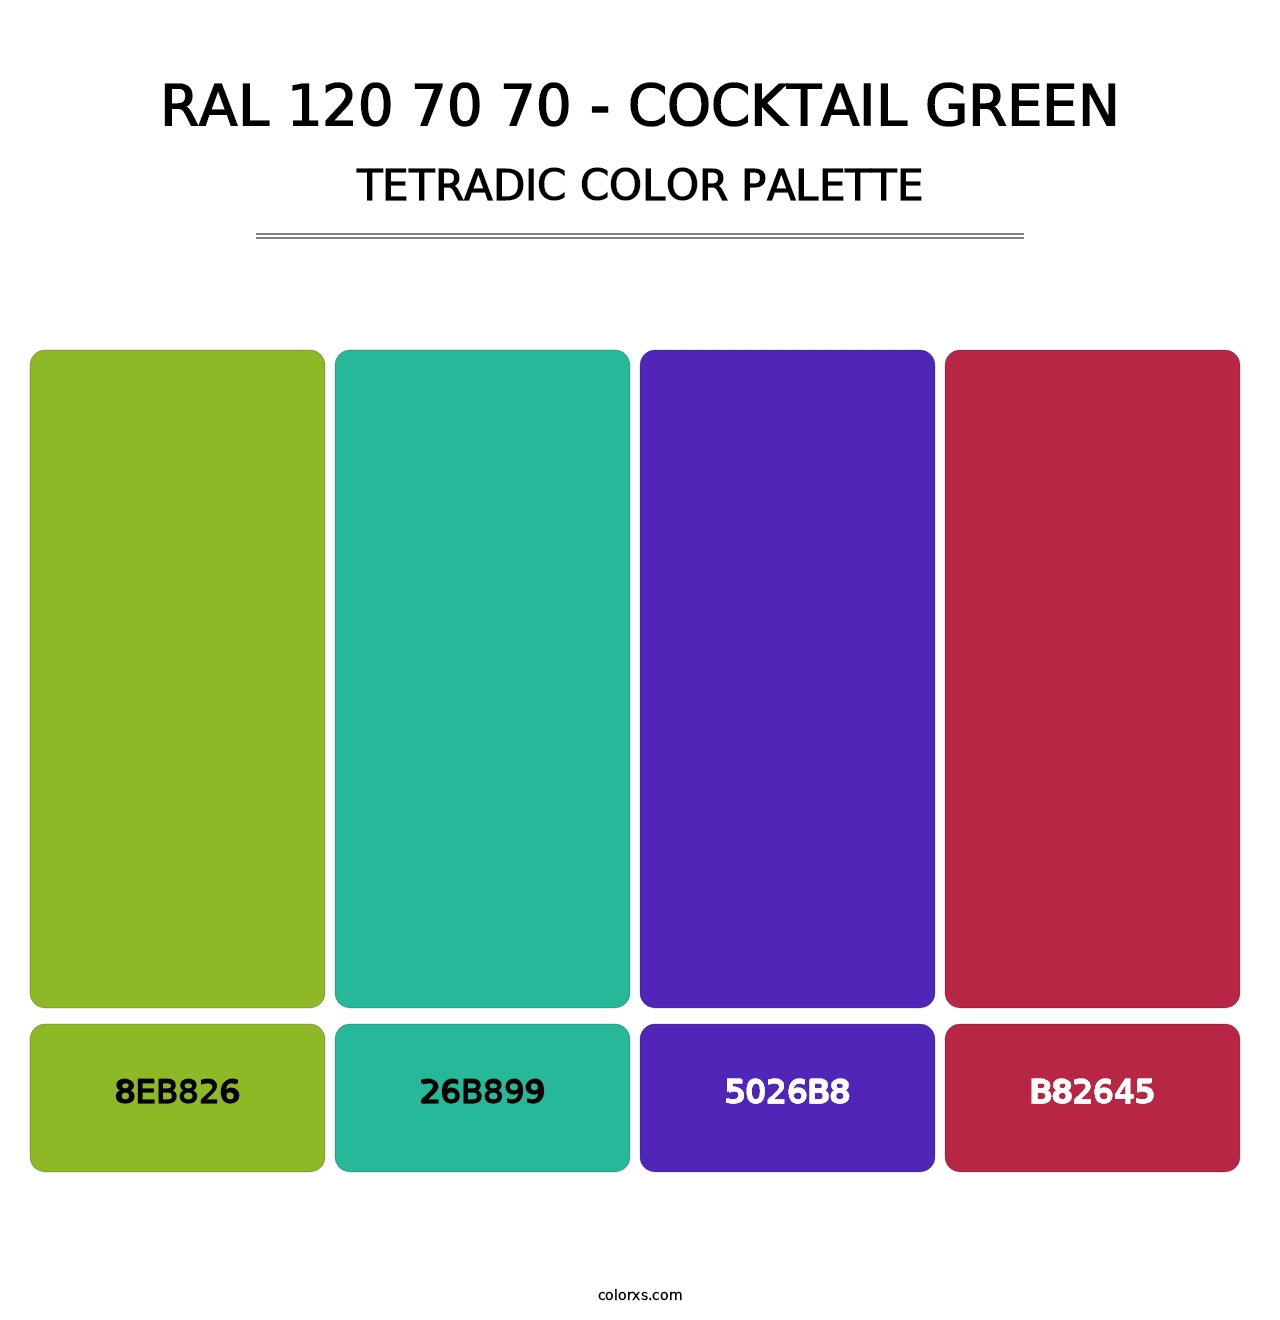 RAL 120 70 70 - Cocktail Green - Tetradic Color Palette